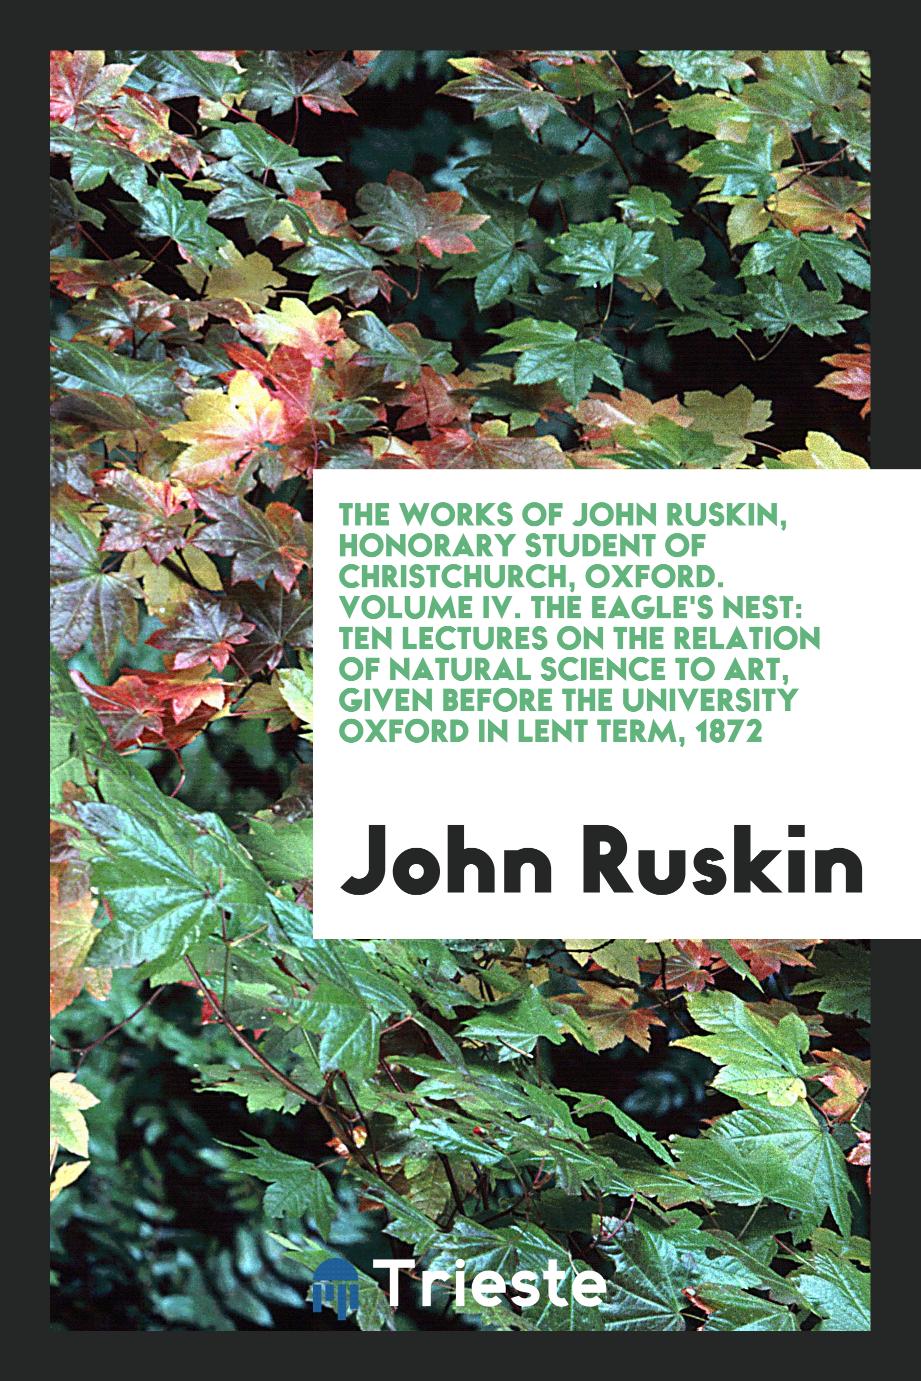 The Works of John Ruskin, Honorary Student of Christchurch, Oxford. Volume IV. The Eagle's Nest: Ten Lectures on the Relation of Natural Science to Art, Given Before the University Oxford in Lent Term, 1872